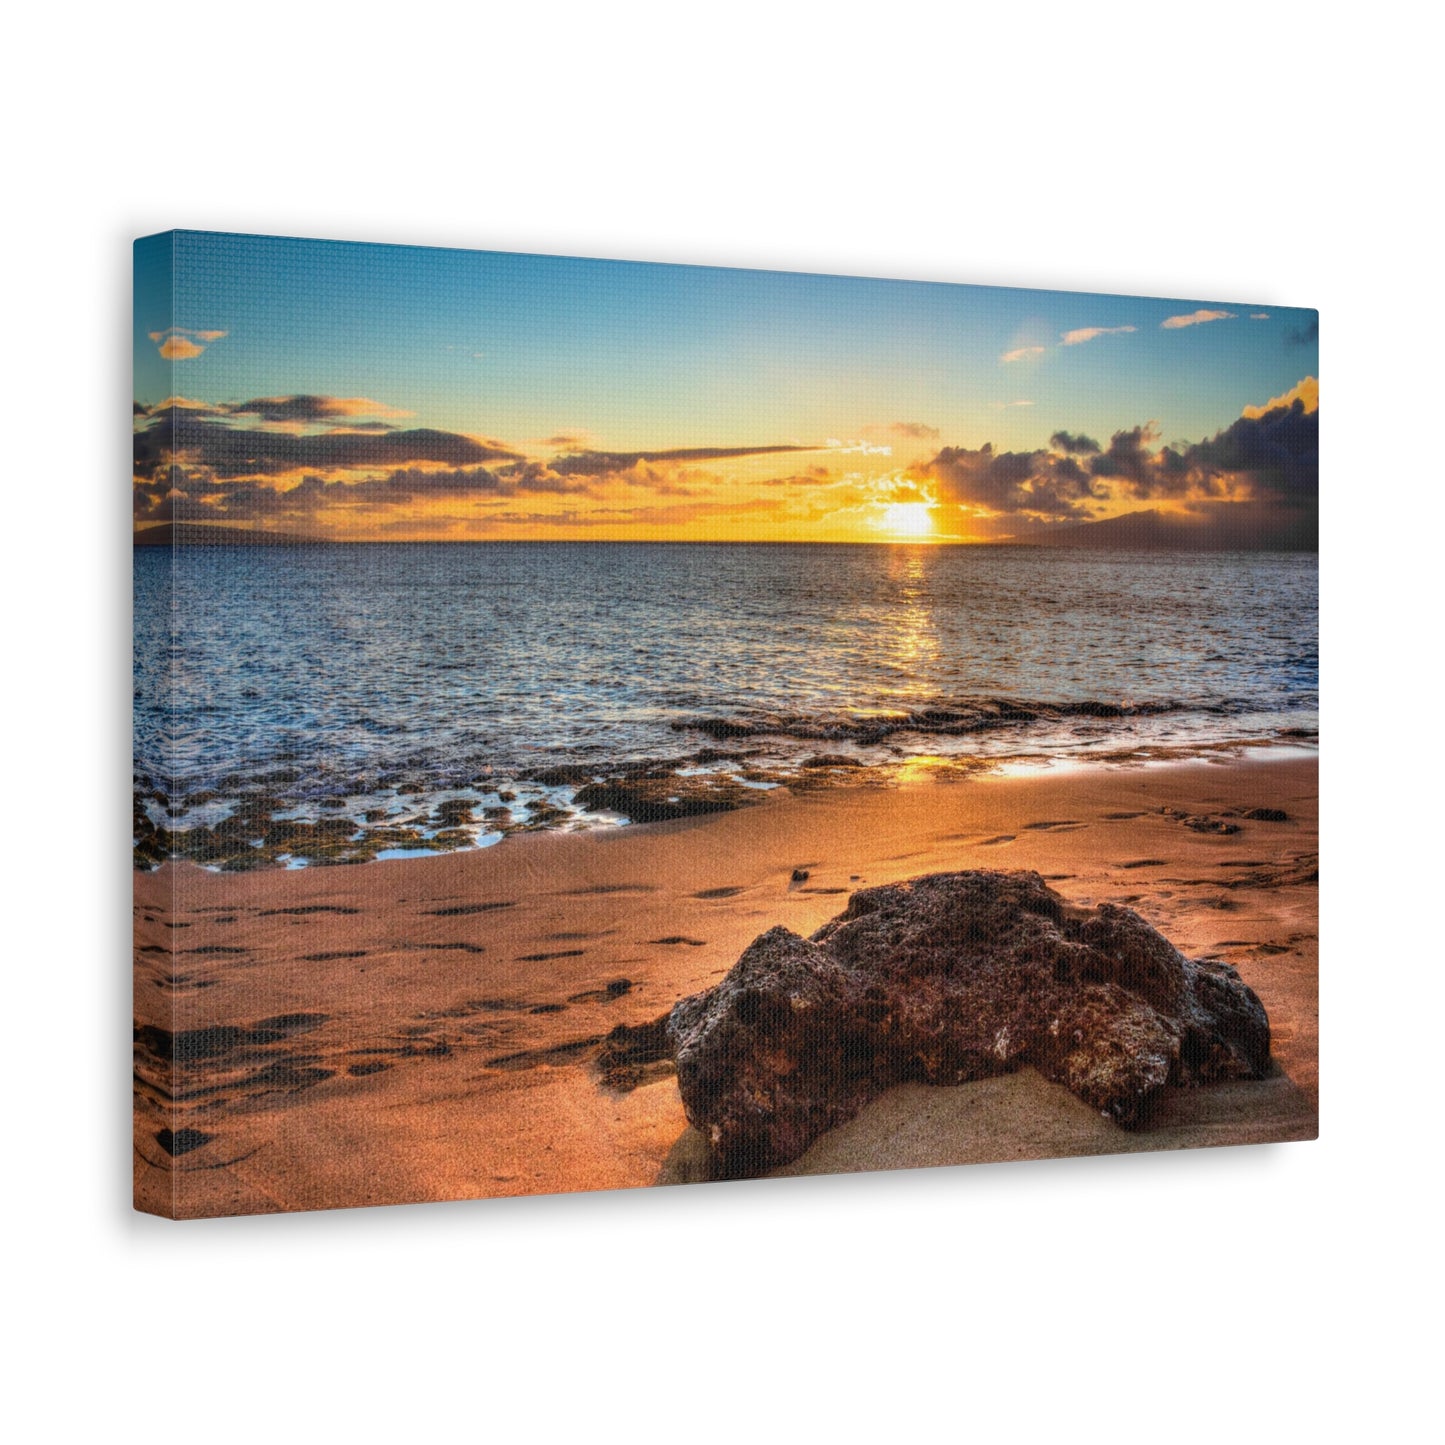 Canvas Print Of A Sunset In Maui For Wall Art